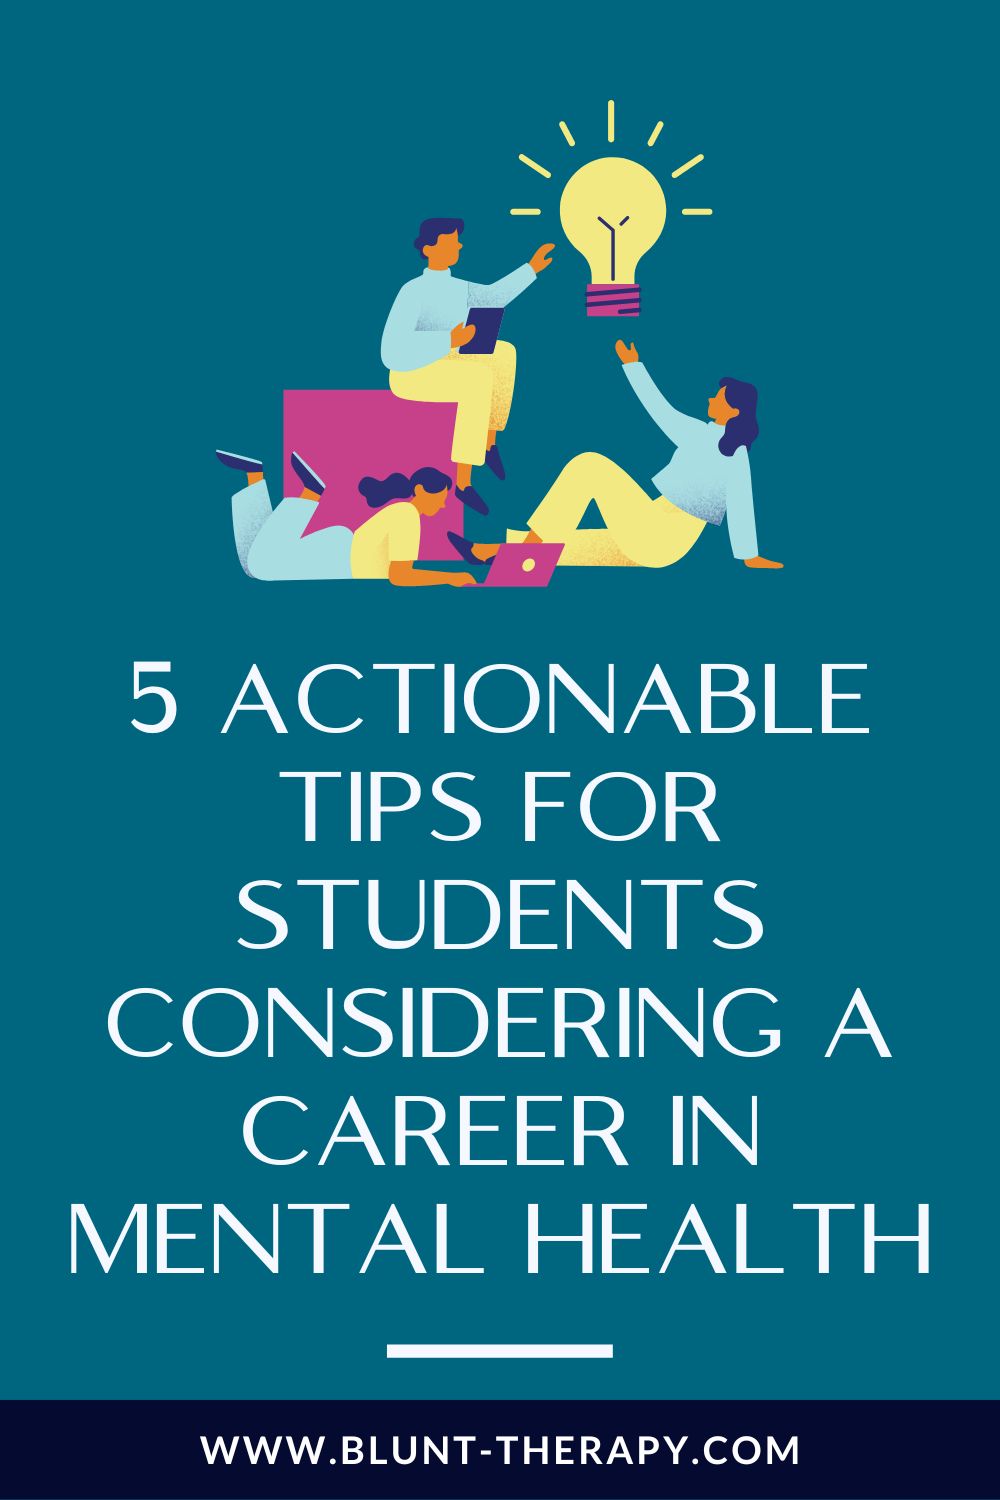 5 Actionable Tips For Students Considering A Career In Mental Health